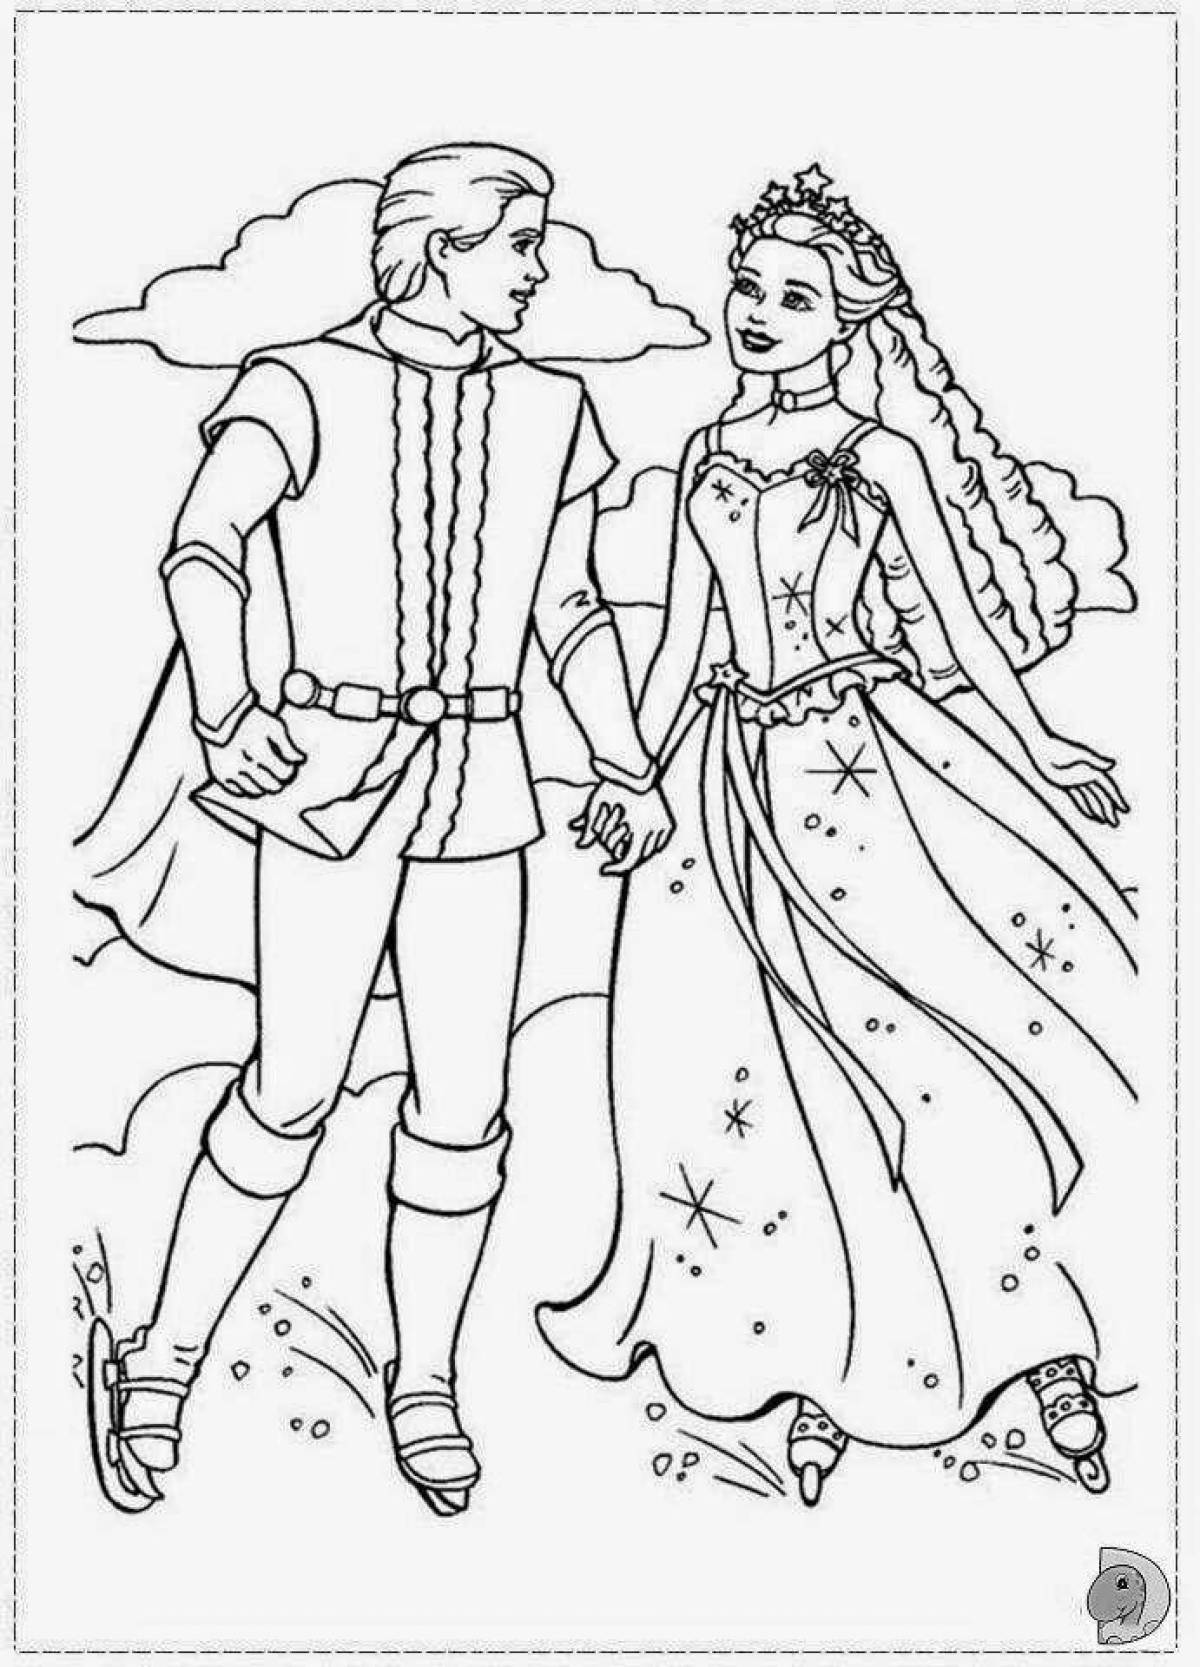 Colorful prince and princess coloring book